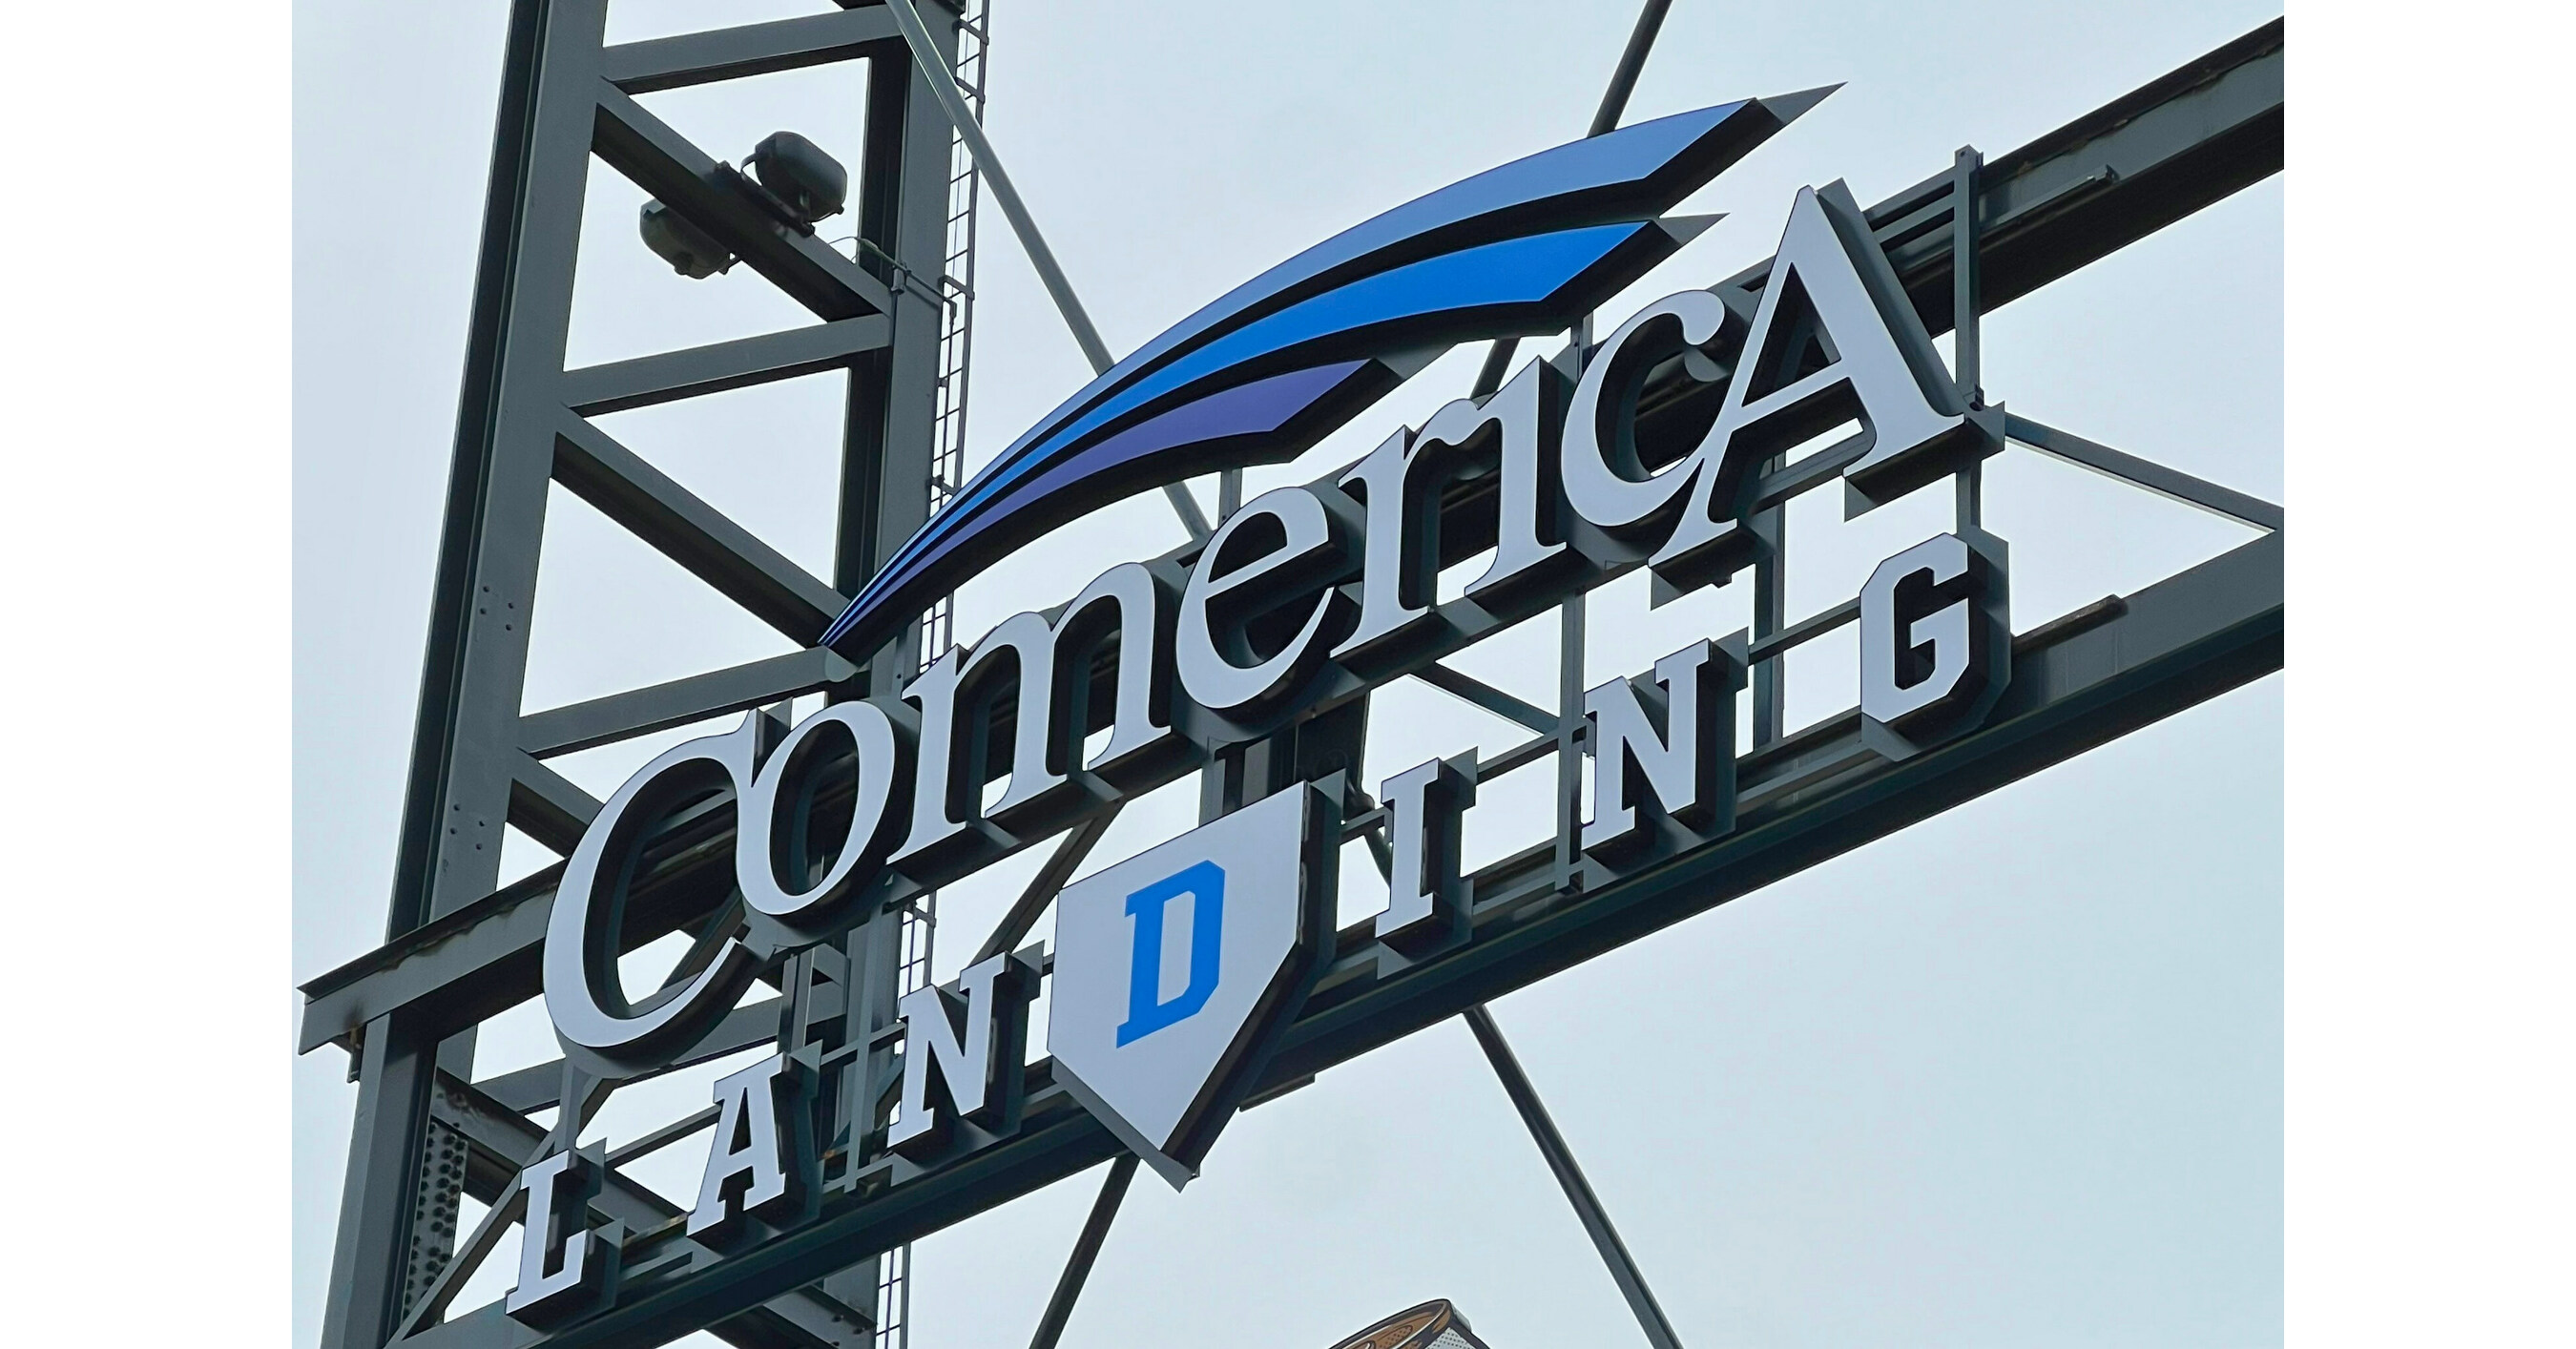 Comerica Park's new rules: Bag policy, what you can and can't